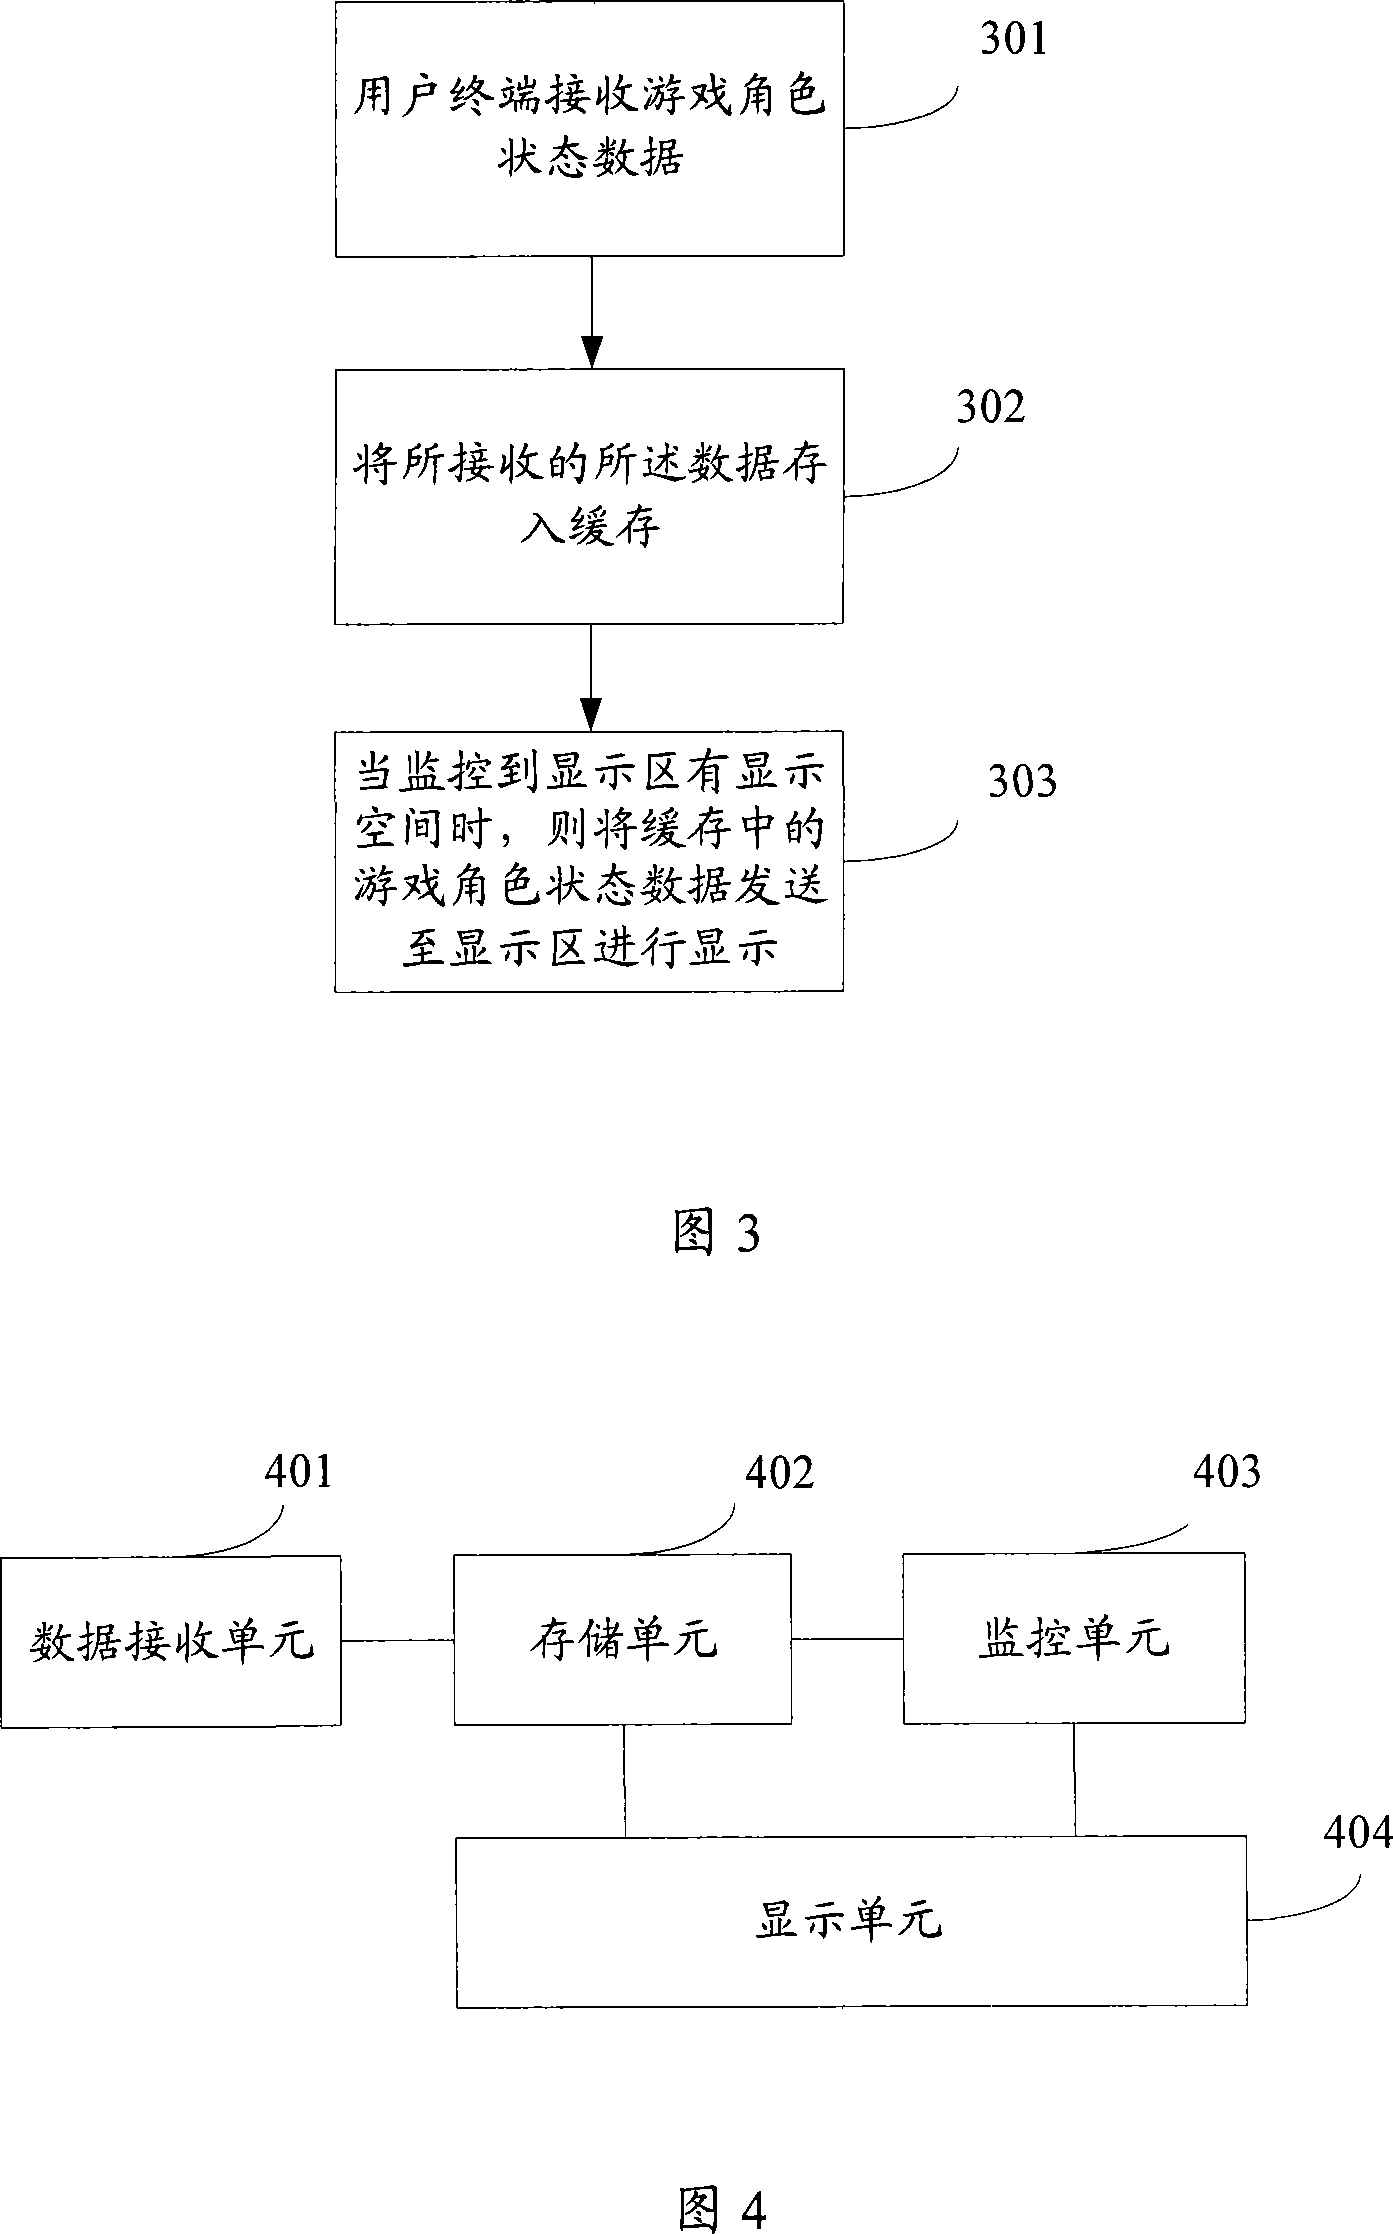 Method and apparatus for displaying game role state